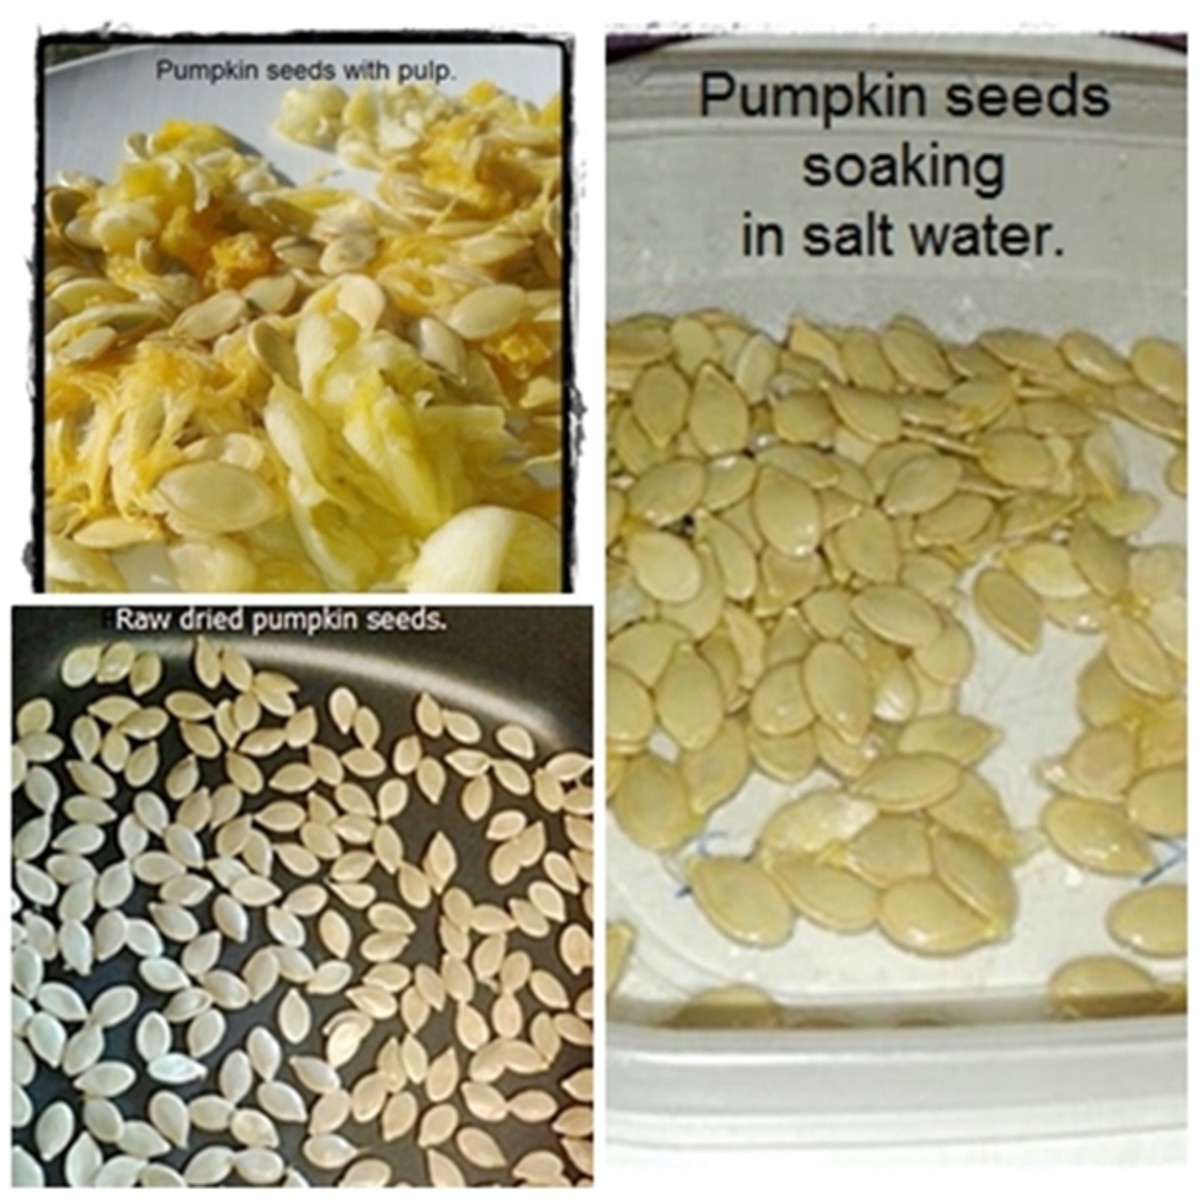 Top left: Pumpkin seeds with stringy membrane; Lower left: Dried raw pumpkin seeds; Right: Pumpkin seeds soaking in salt water.